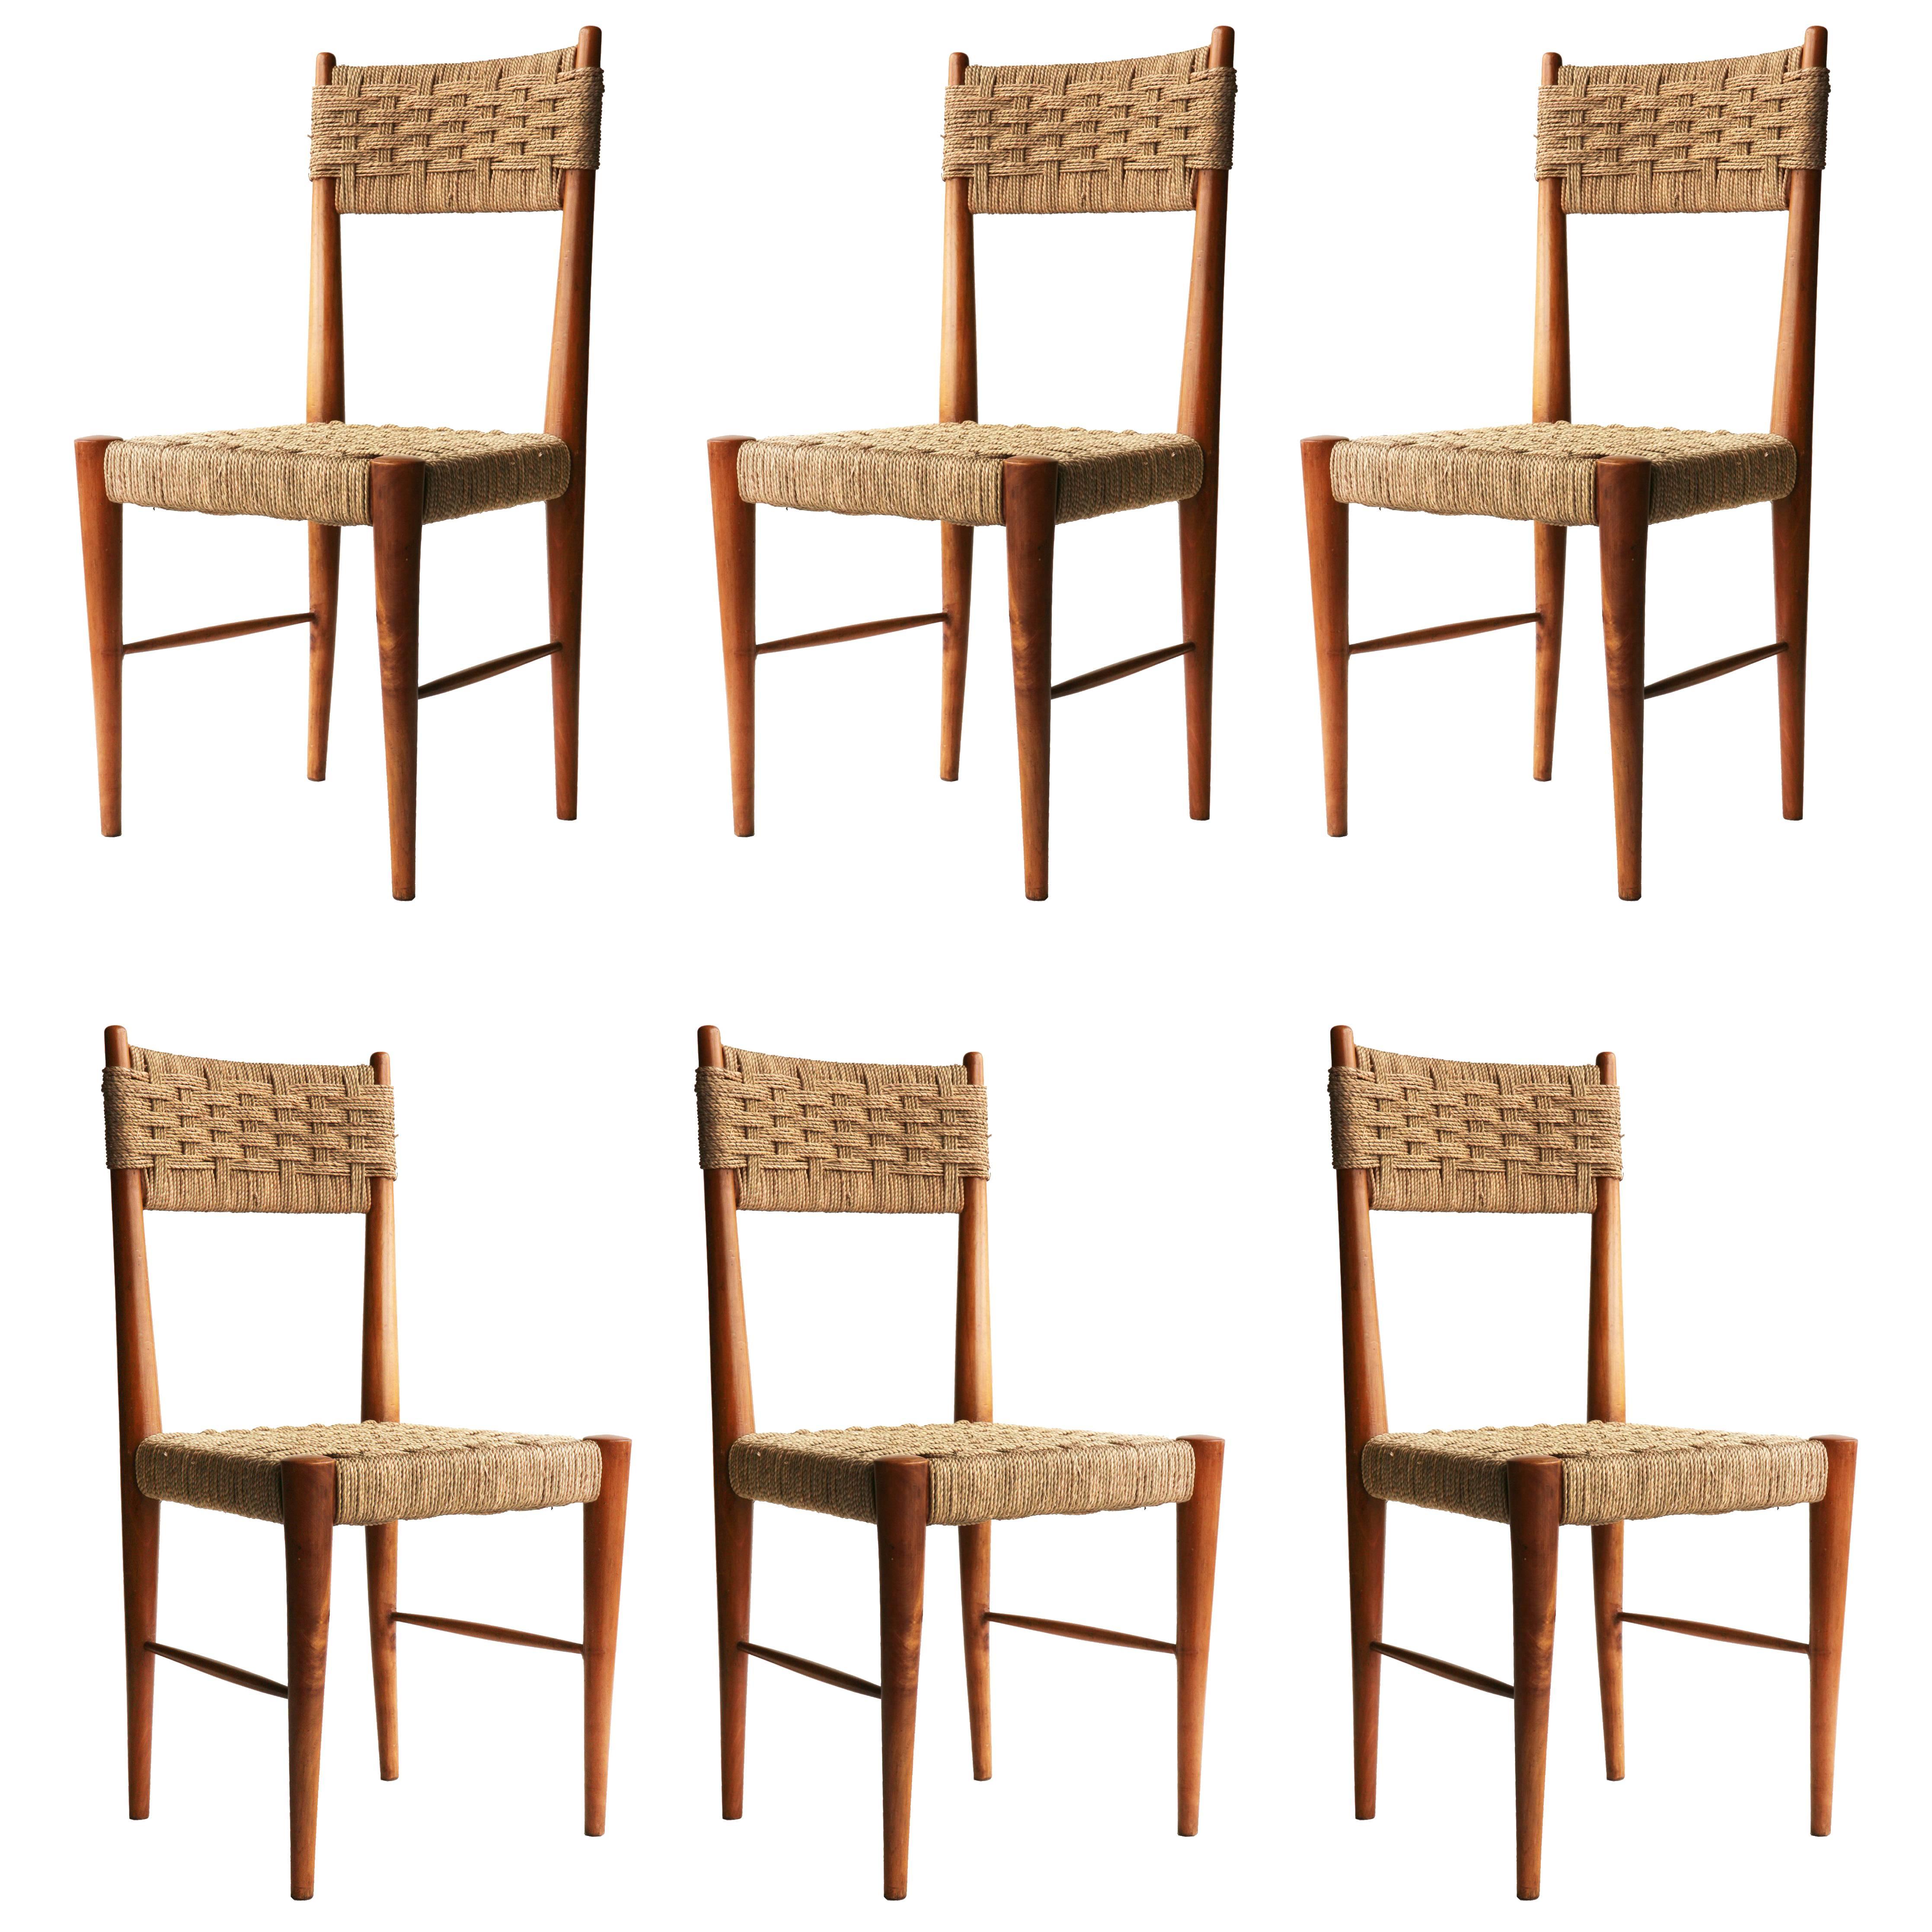 Set of Six Chairs with Wooden Structure and Natural Fiber, Italia, 1950